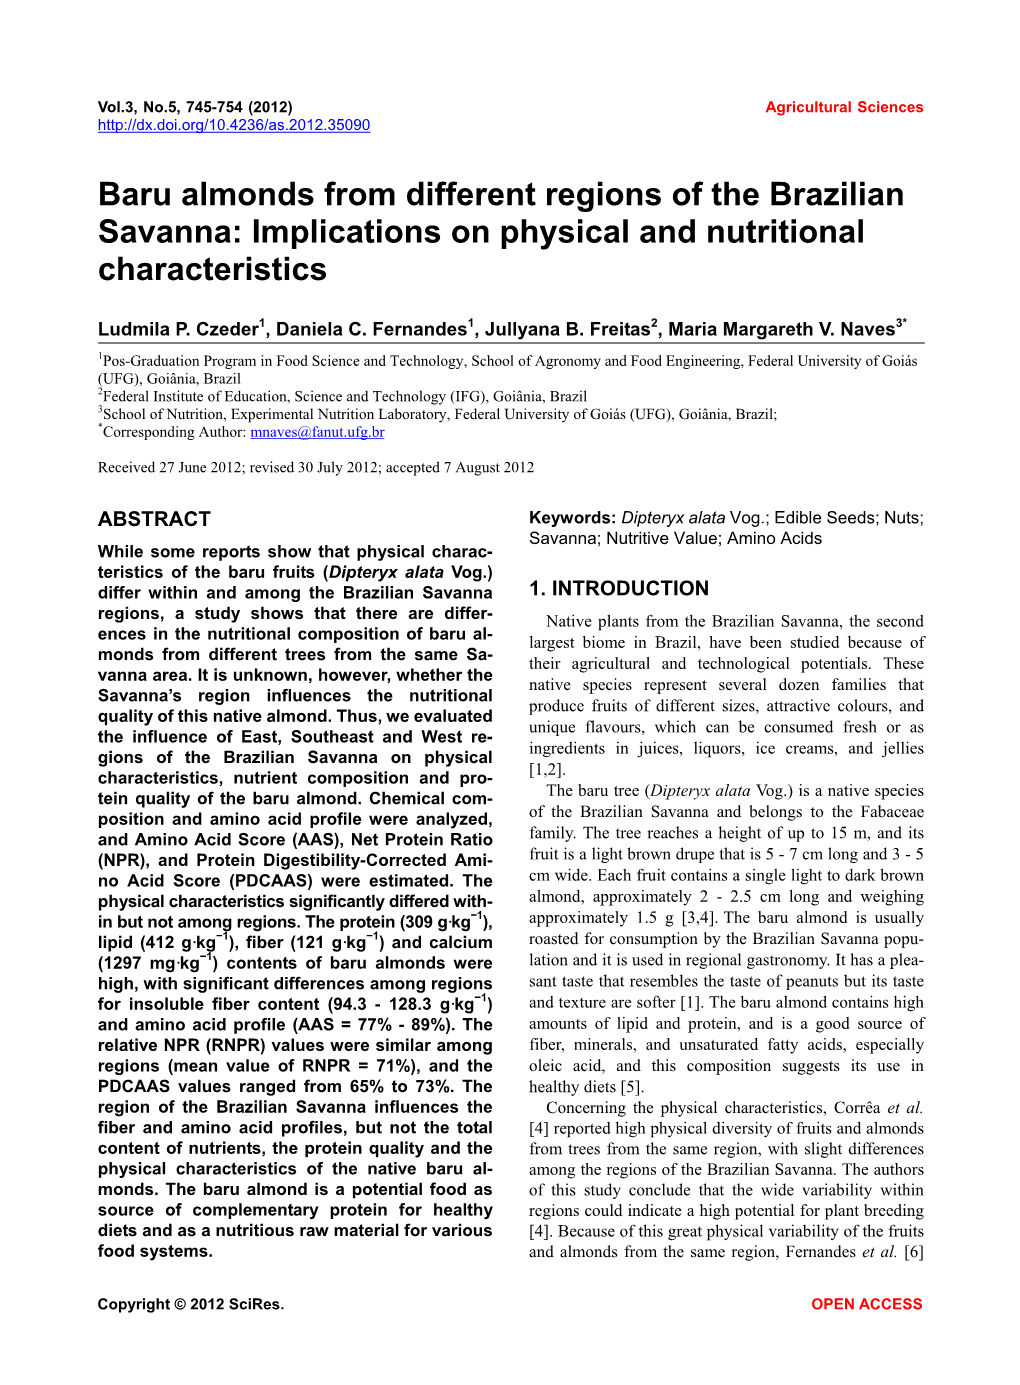 Baru Almonds from Different Regions of the Brazilian Savanna: Implications on Physical and Nutritional Characteristics